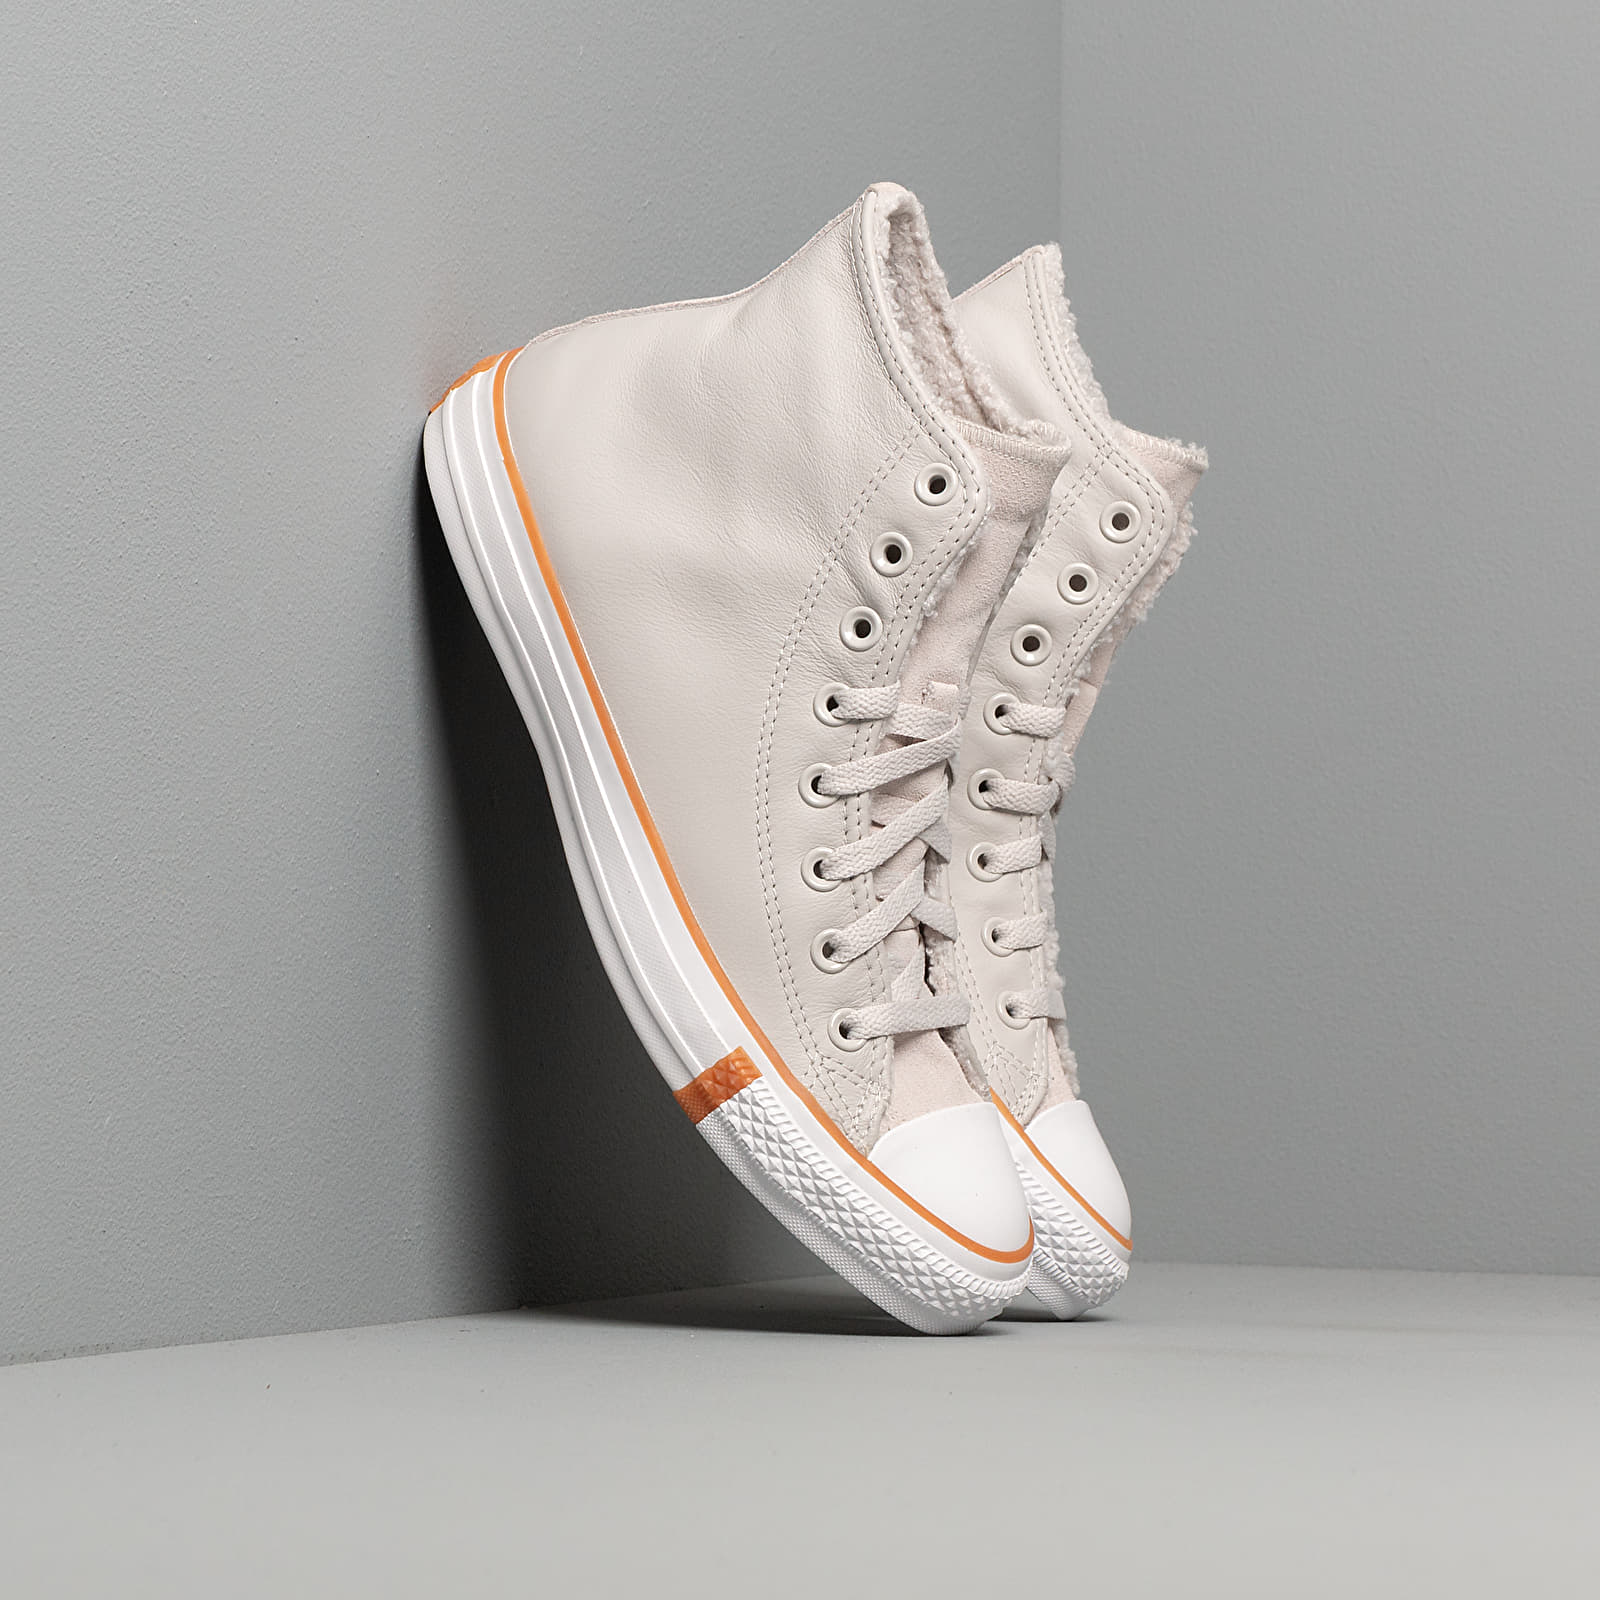 Buty męskie Converse Chuck Taylor All Star Faux Shearling Pale Putty/ White/ Honey